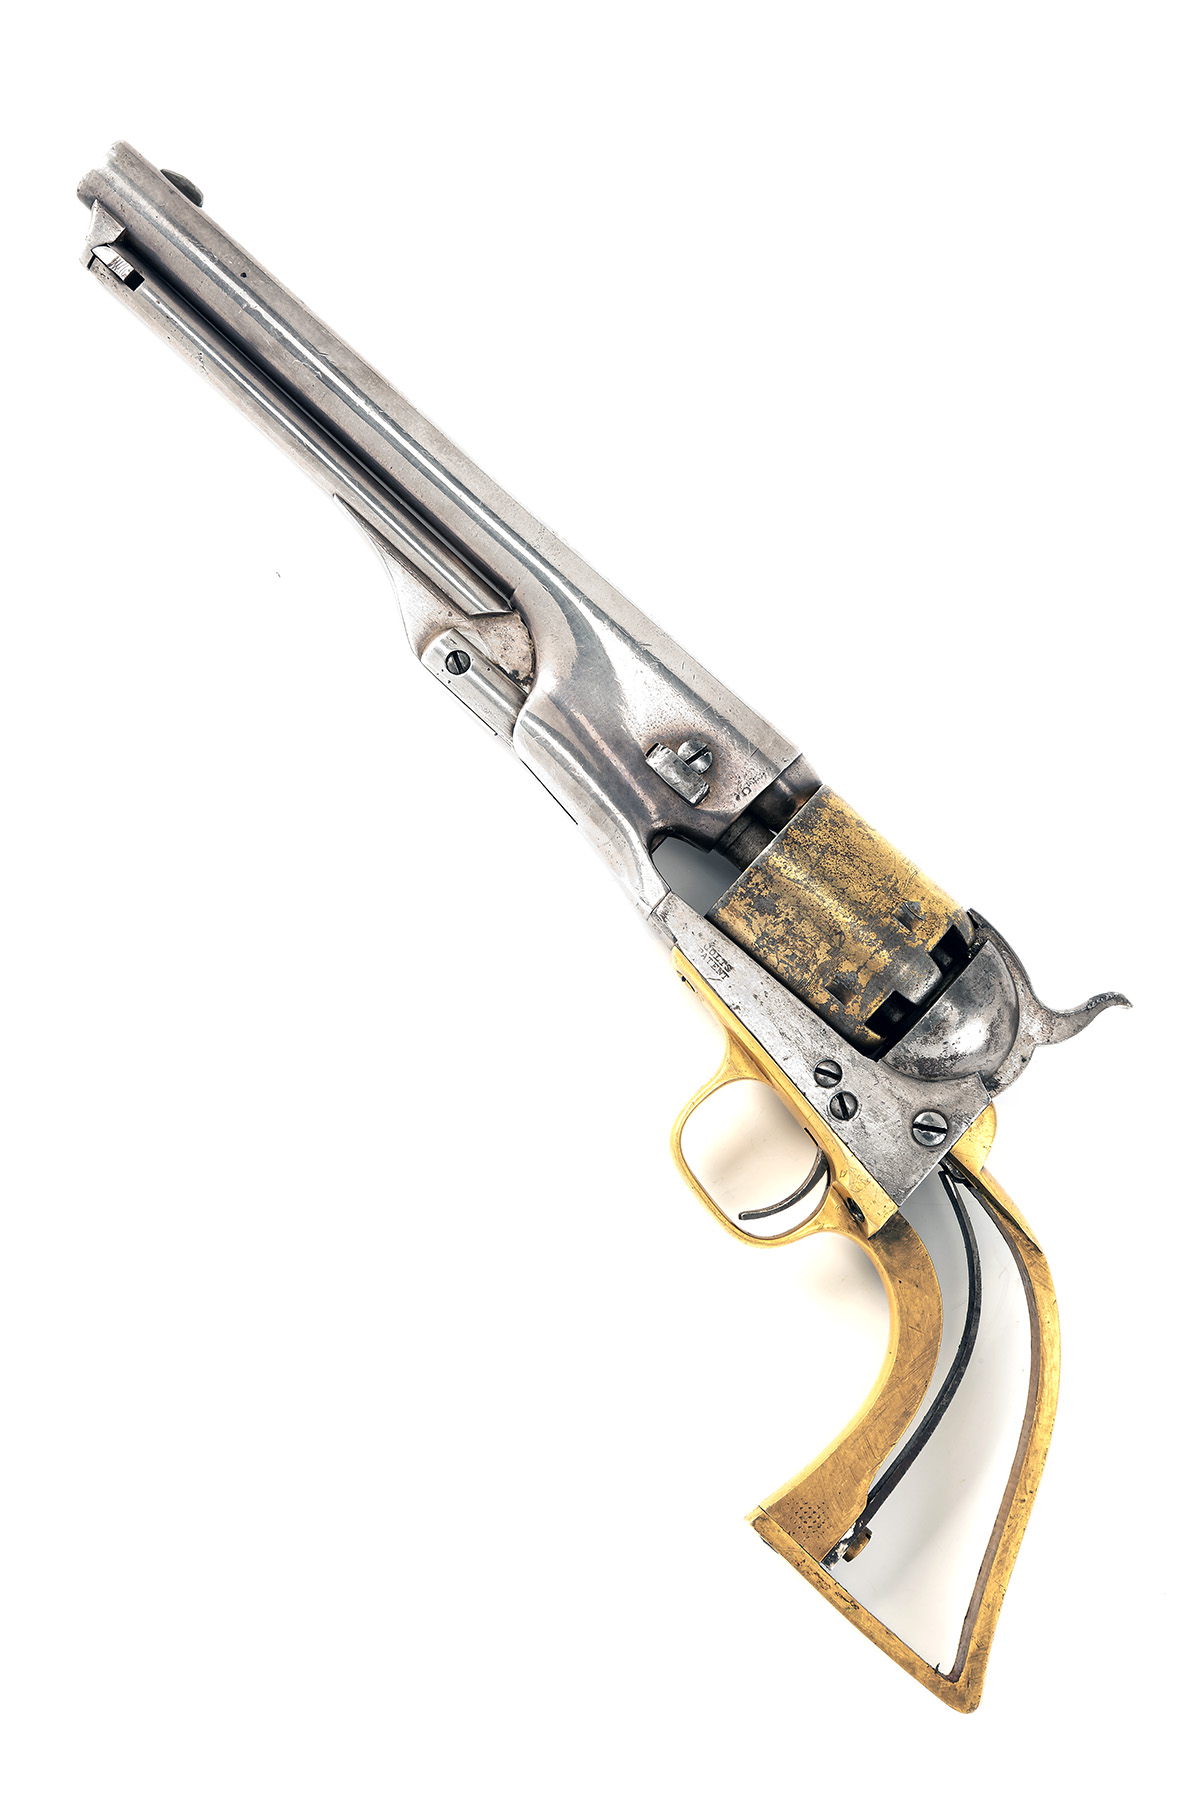 A DELUXE GOLD AND SILVER PLATED .36 COLT MODEL 1861 NAVY SINGLE ACTION PERCUSSION REVOLVER, CIRCA - Image 2 of 4